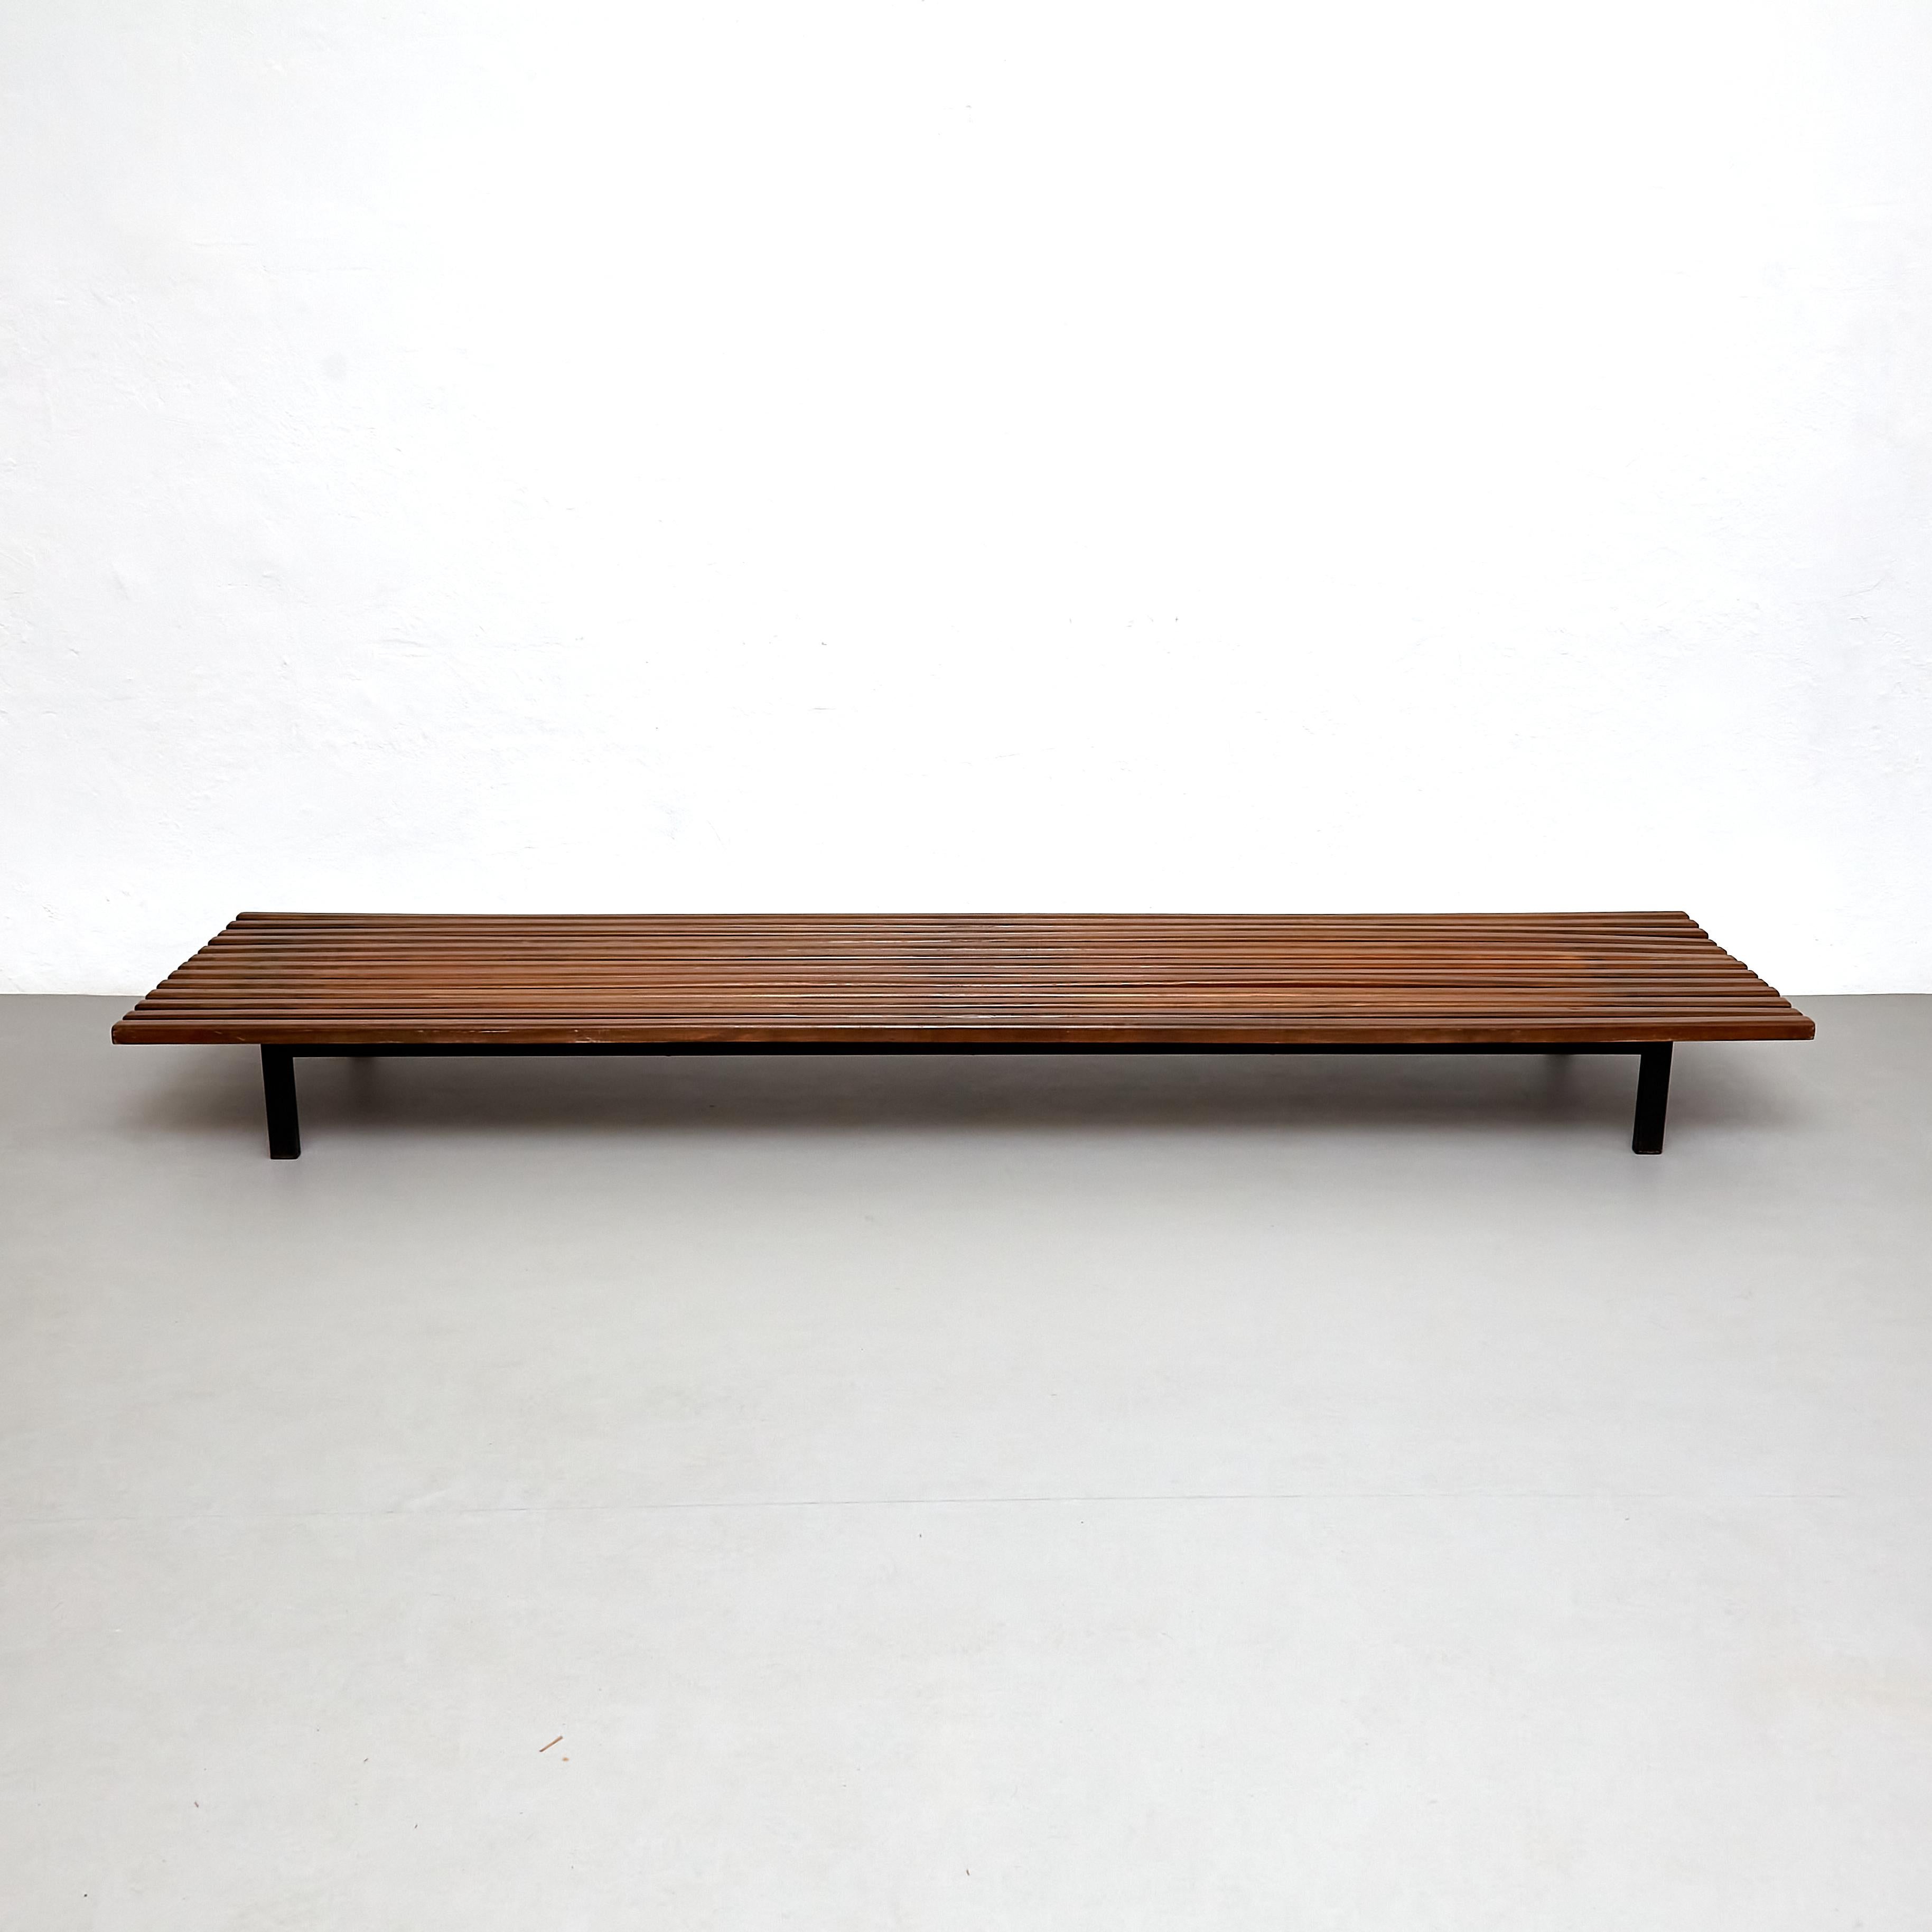 Bench designed by Charlotte Perriand.
Edited by Steph Simon.

Provenance: Cansado, Mauritania (Africa).

In original condition with minor wear consistent of age and use, preserving a beautiful patina.

Materials: 
Wood, metal 

Dimensions: